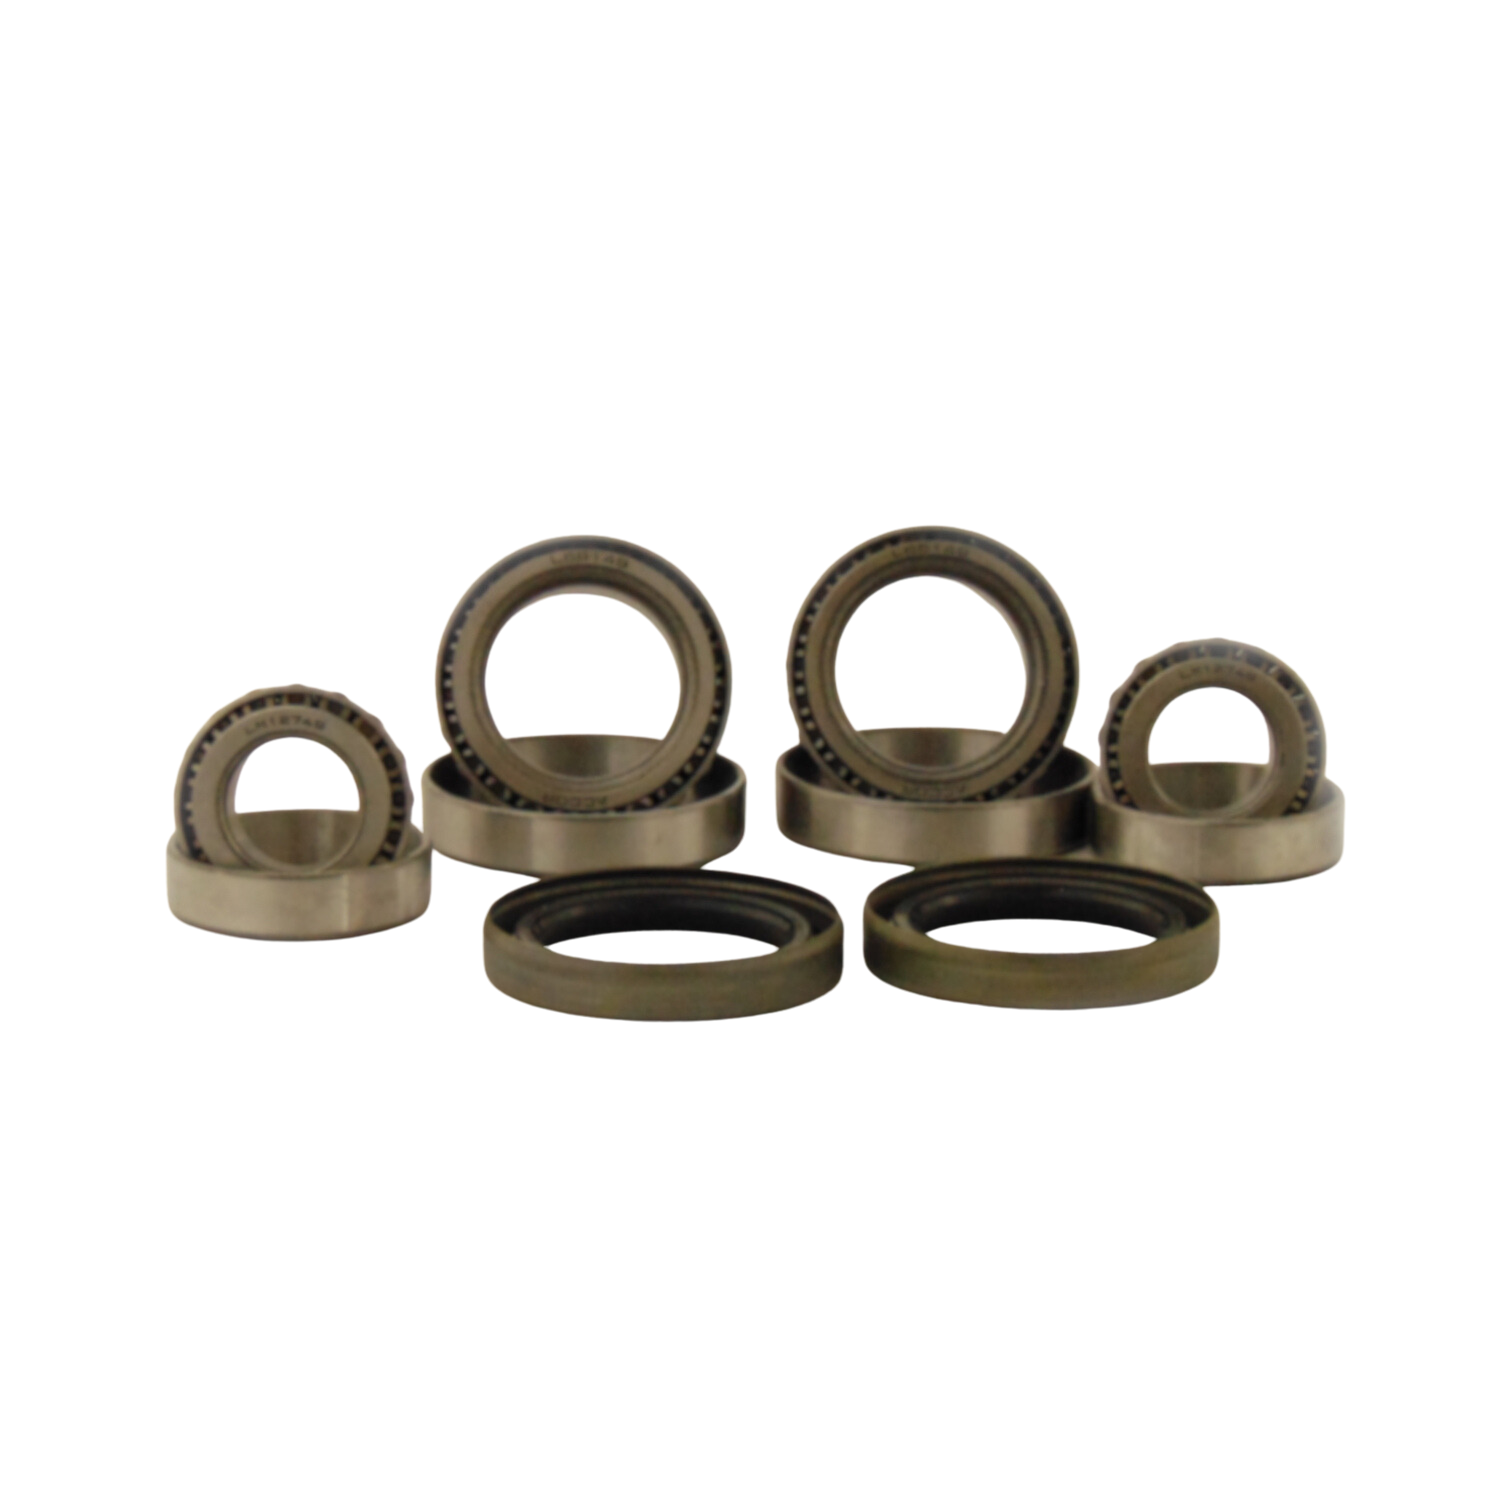 Trailer Wheel Bearing Kits x2 with Dustcap for Holden Axles. LM67048 and LM11949